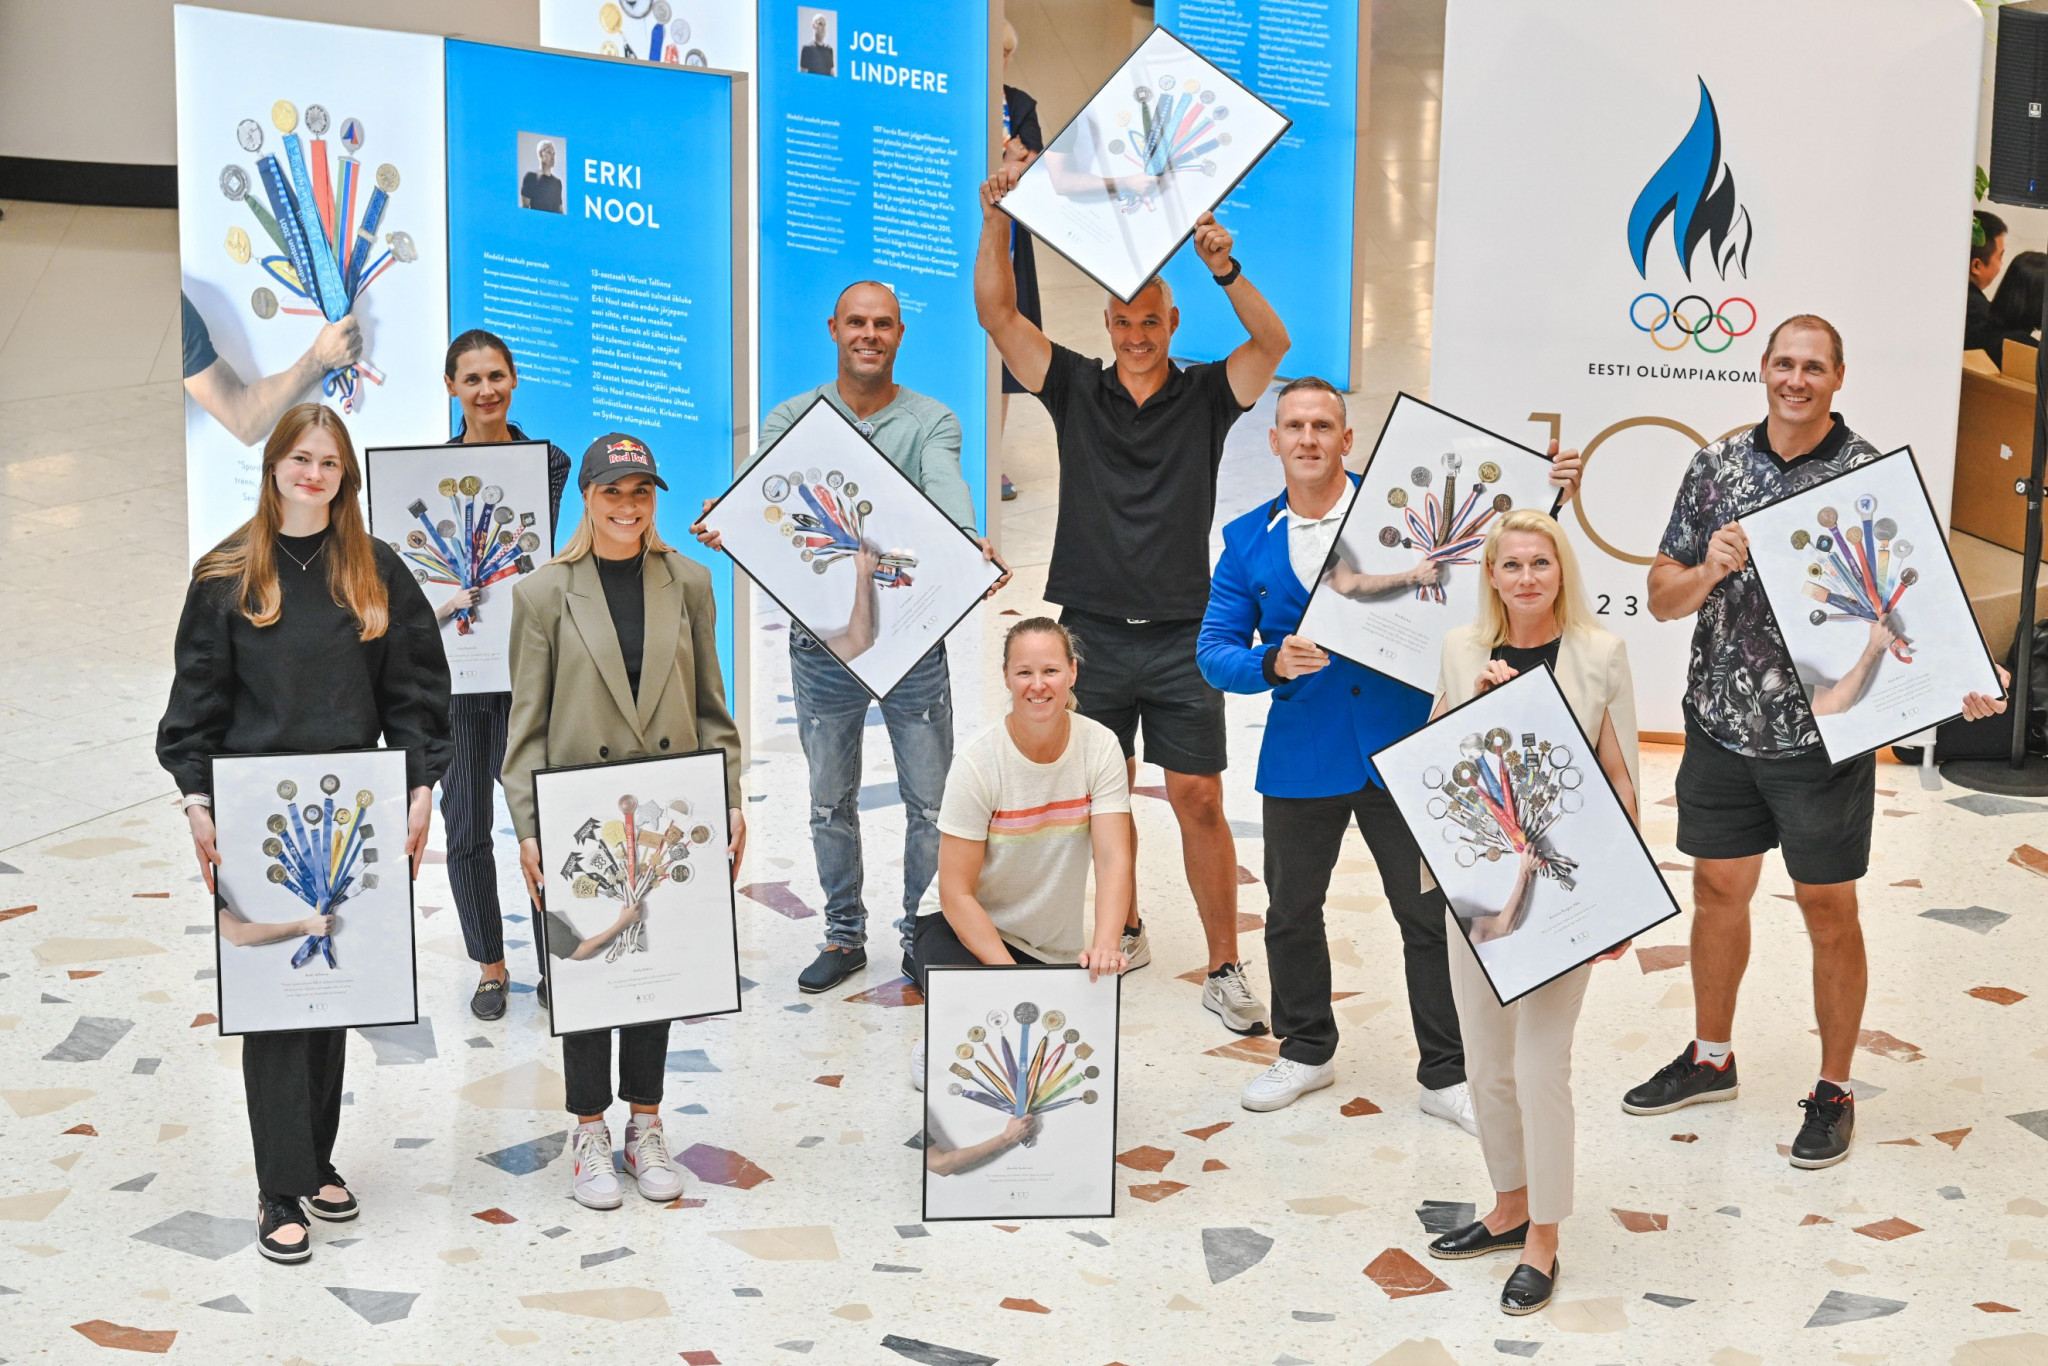 Estonian Olympic Committee launches photo exhibition to celebrate 100th anniversary